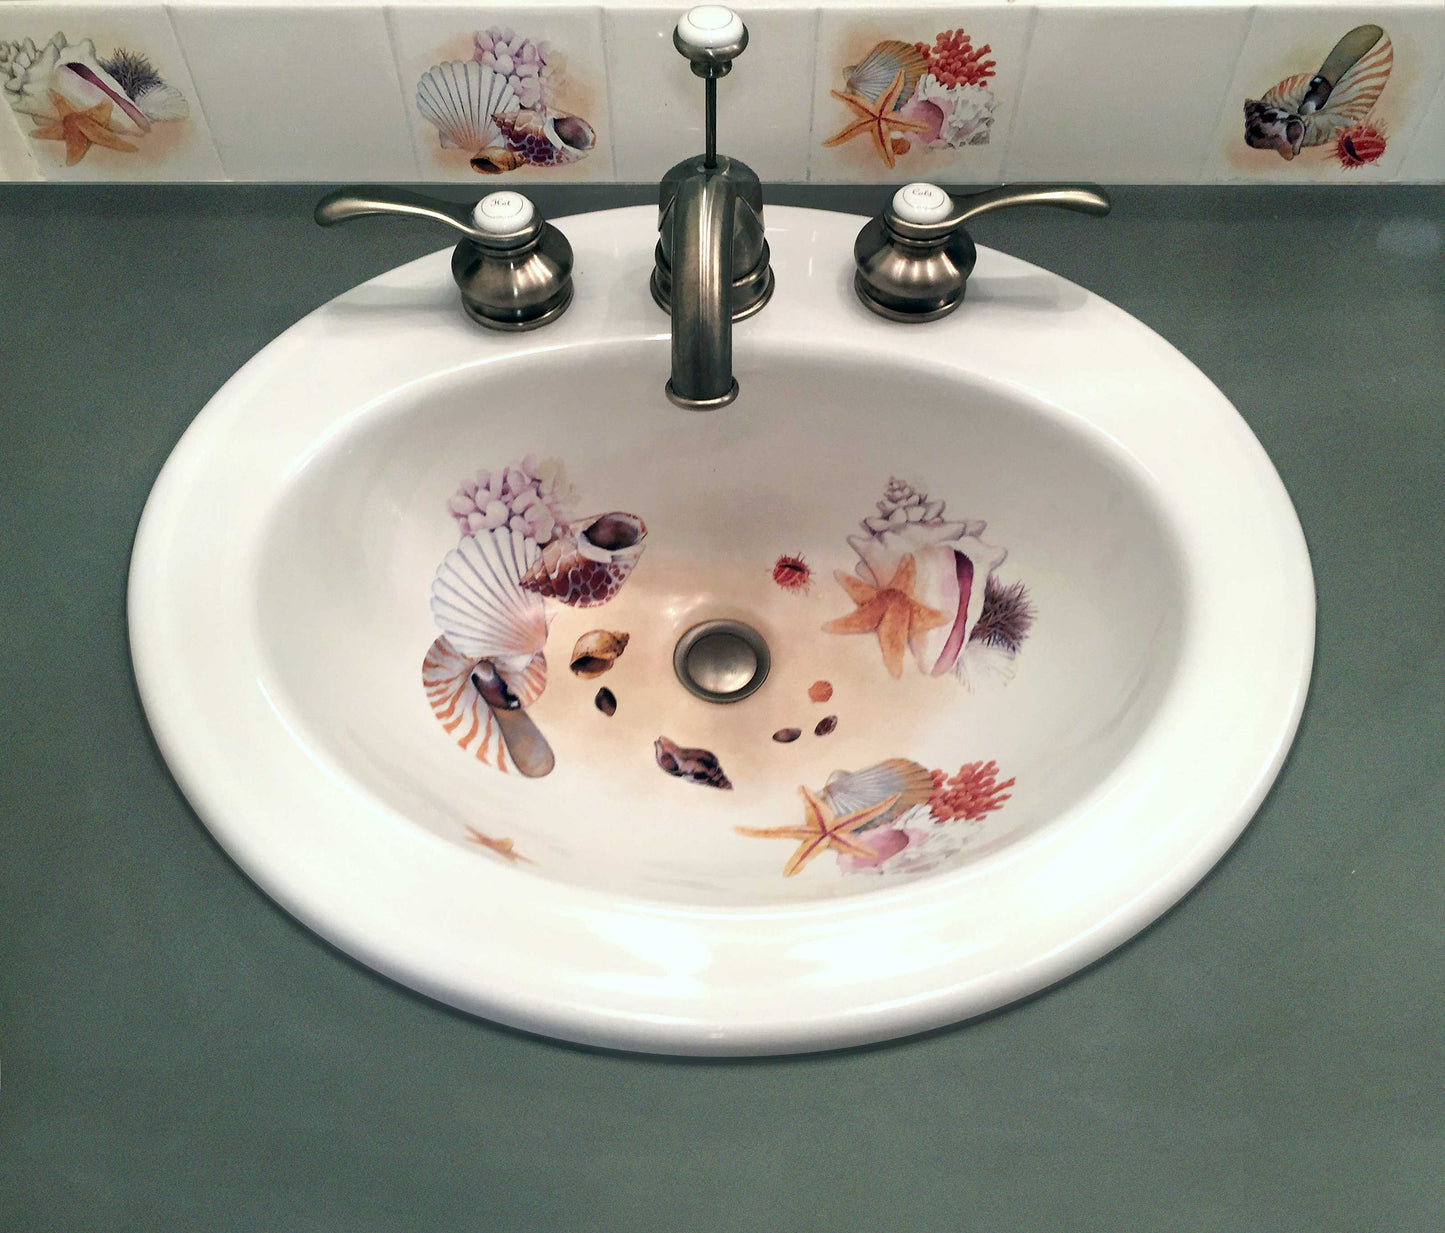 Kohler Pennington Drop-in sink painted with sea shells and starfish